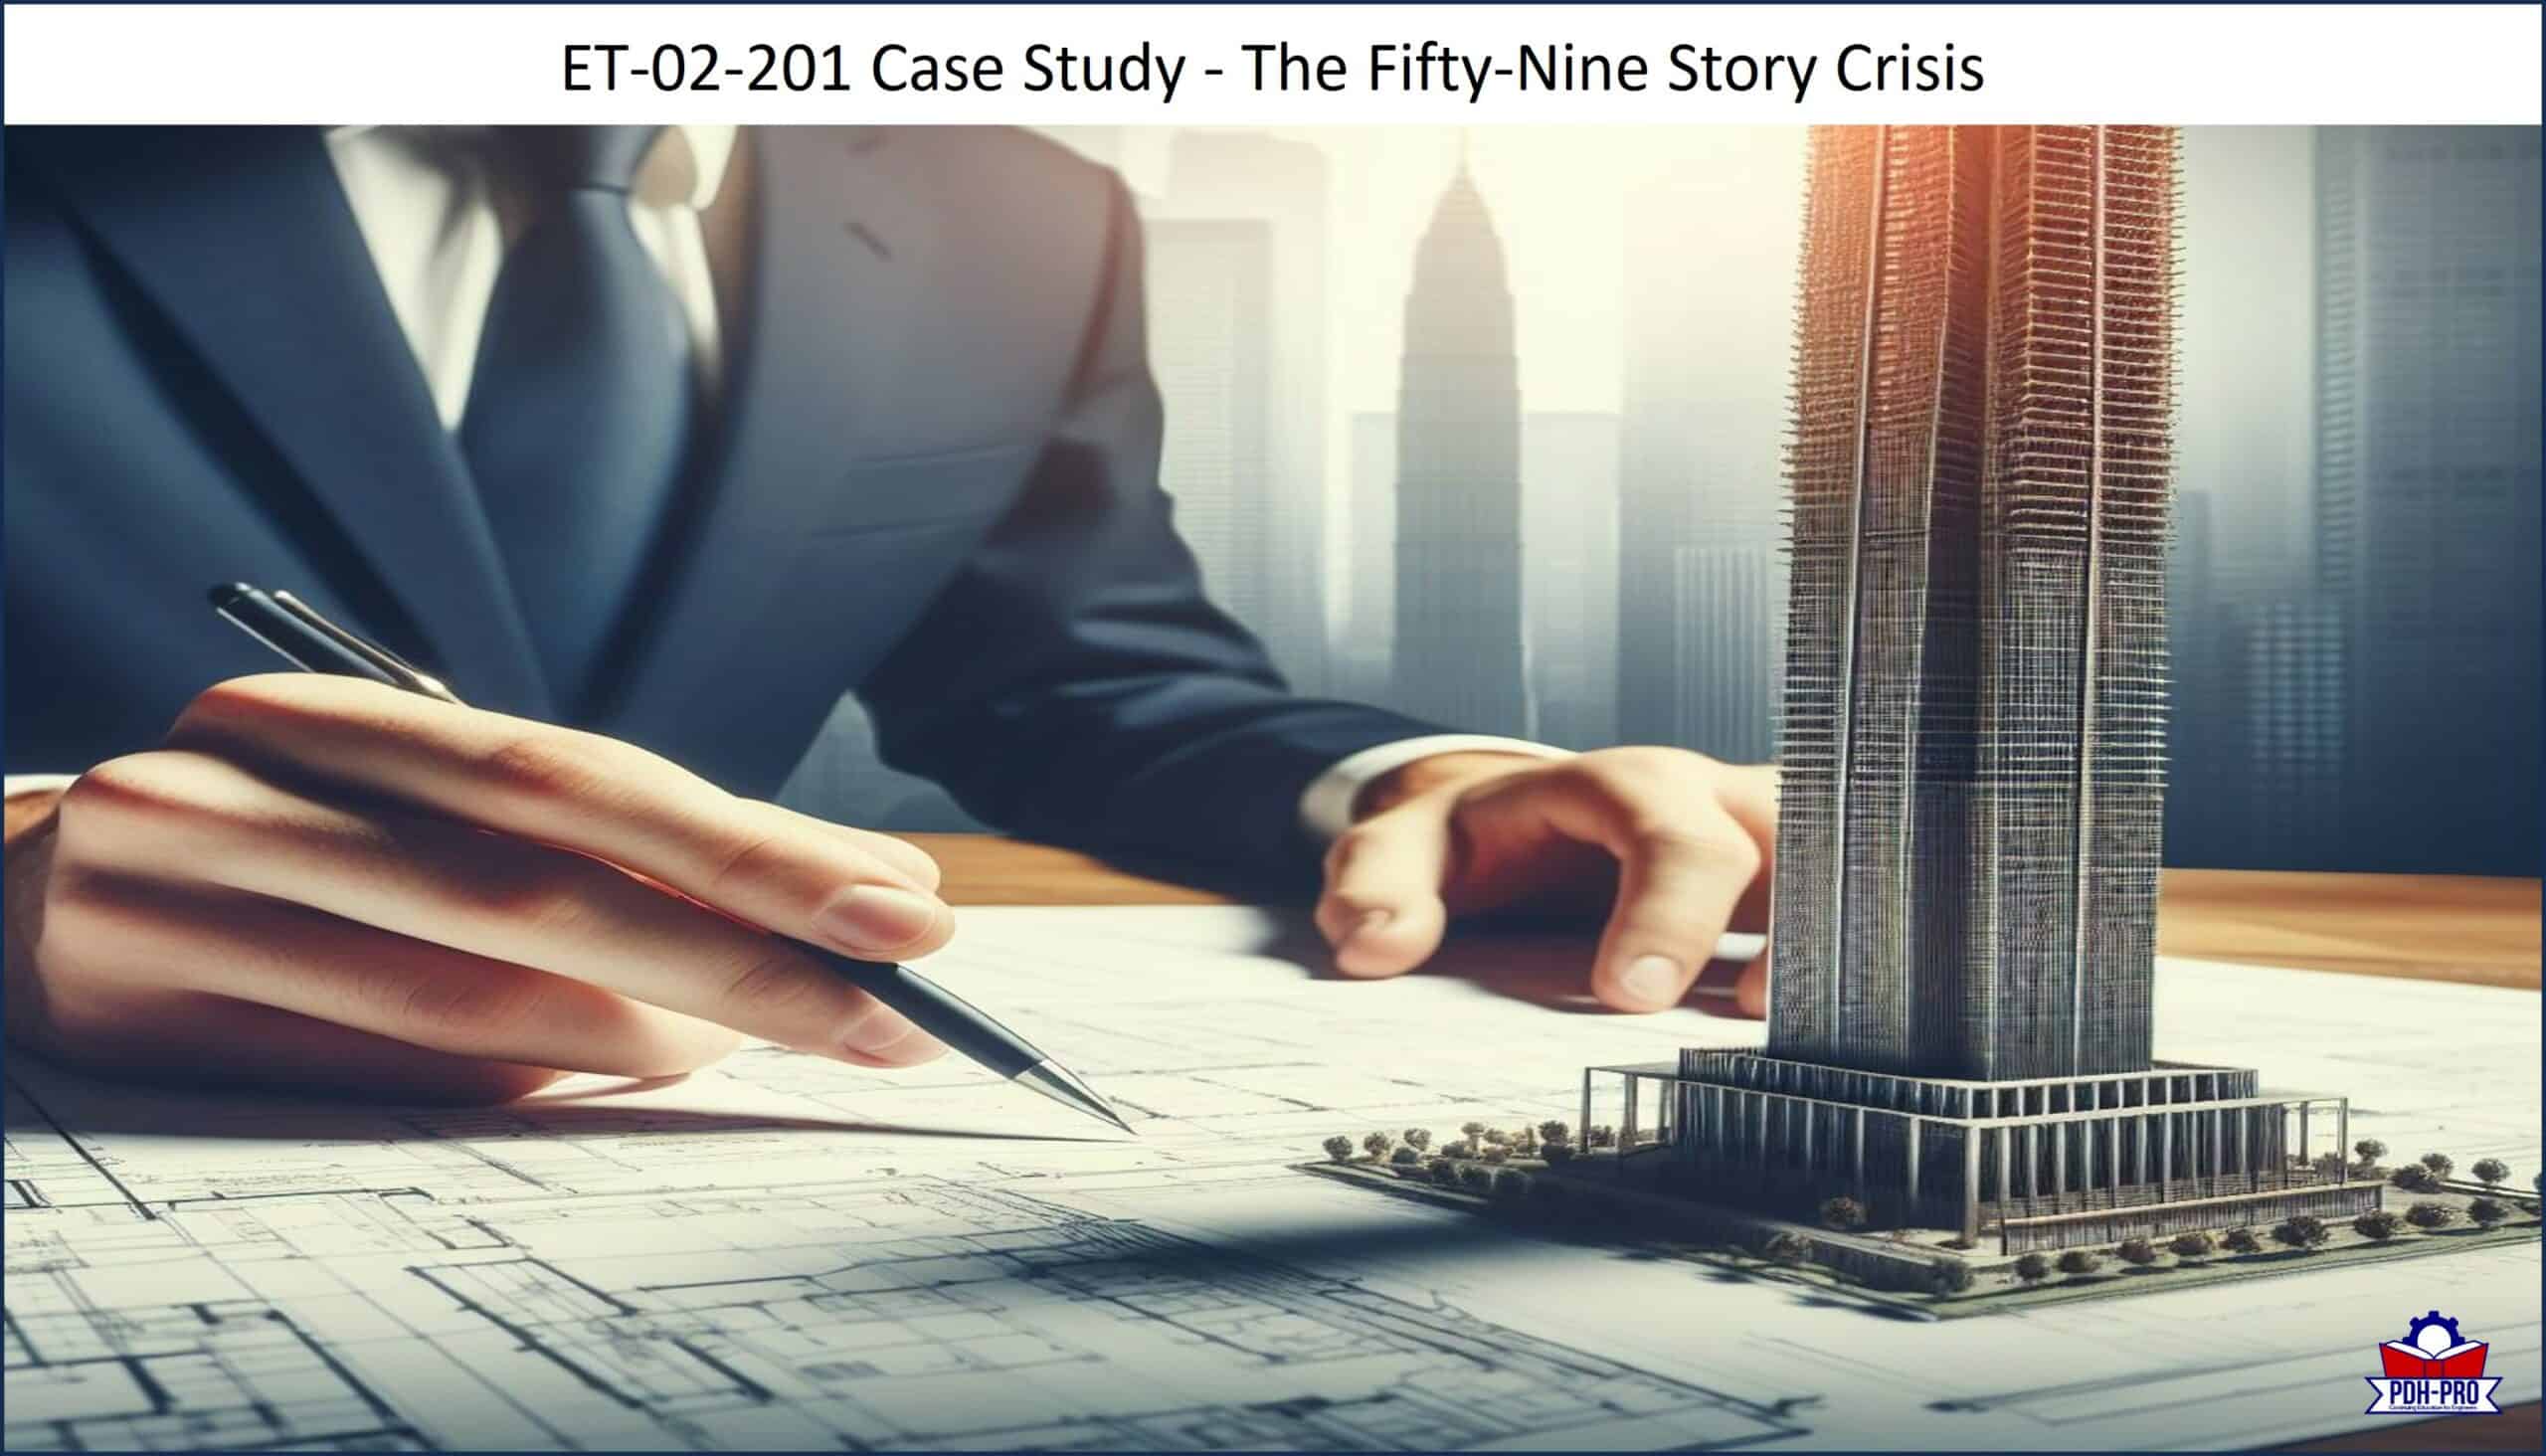 Case Study - The Fifty-Nine Story Crisis